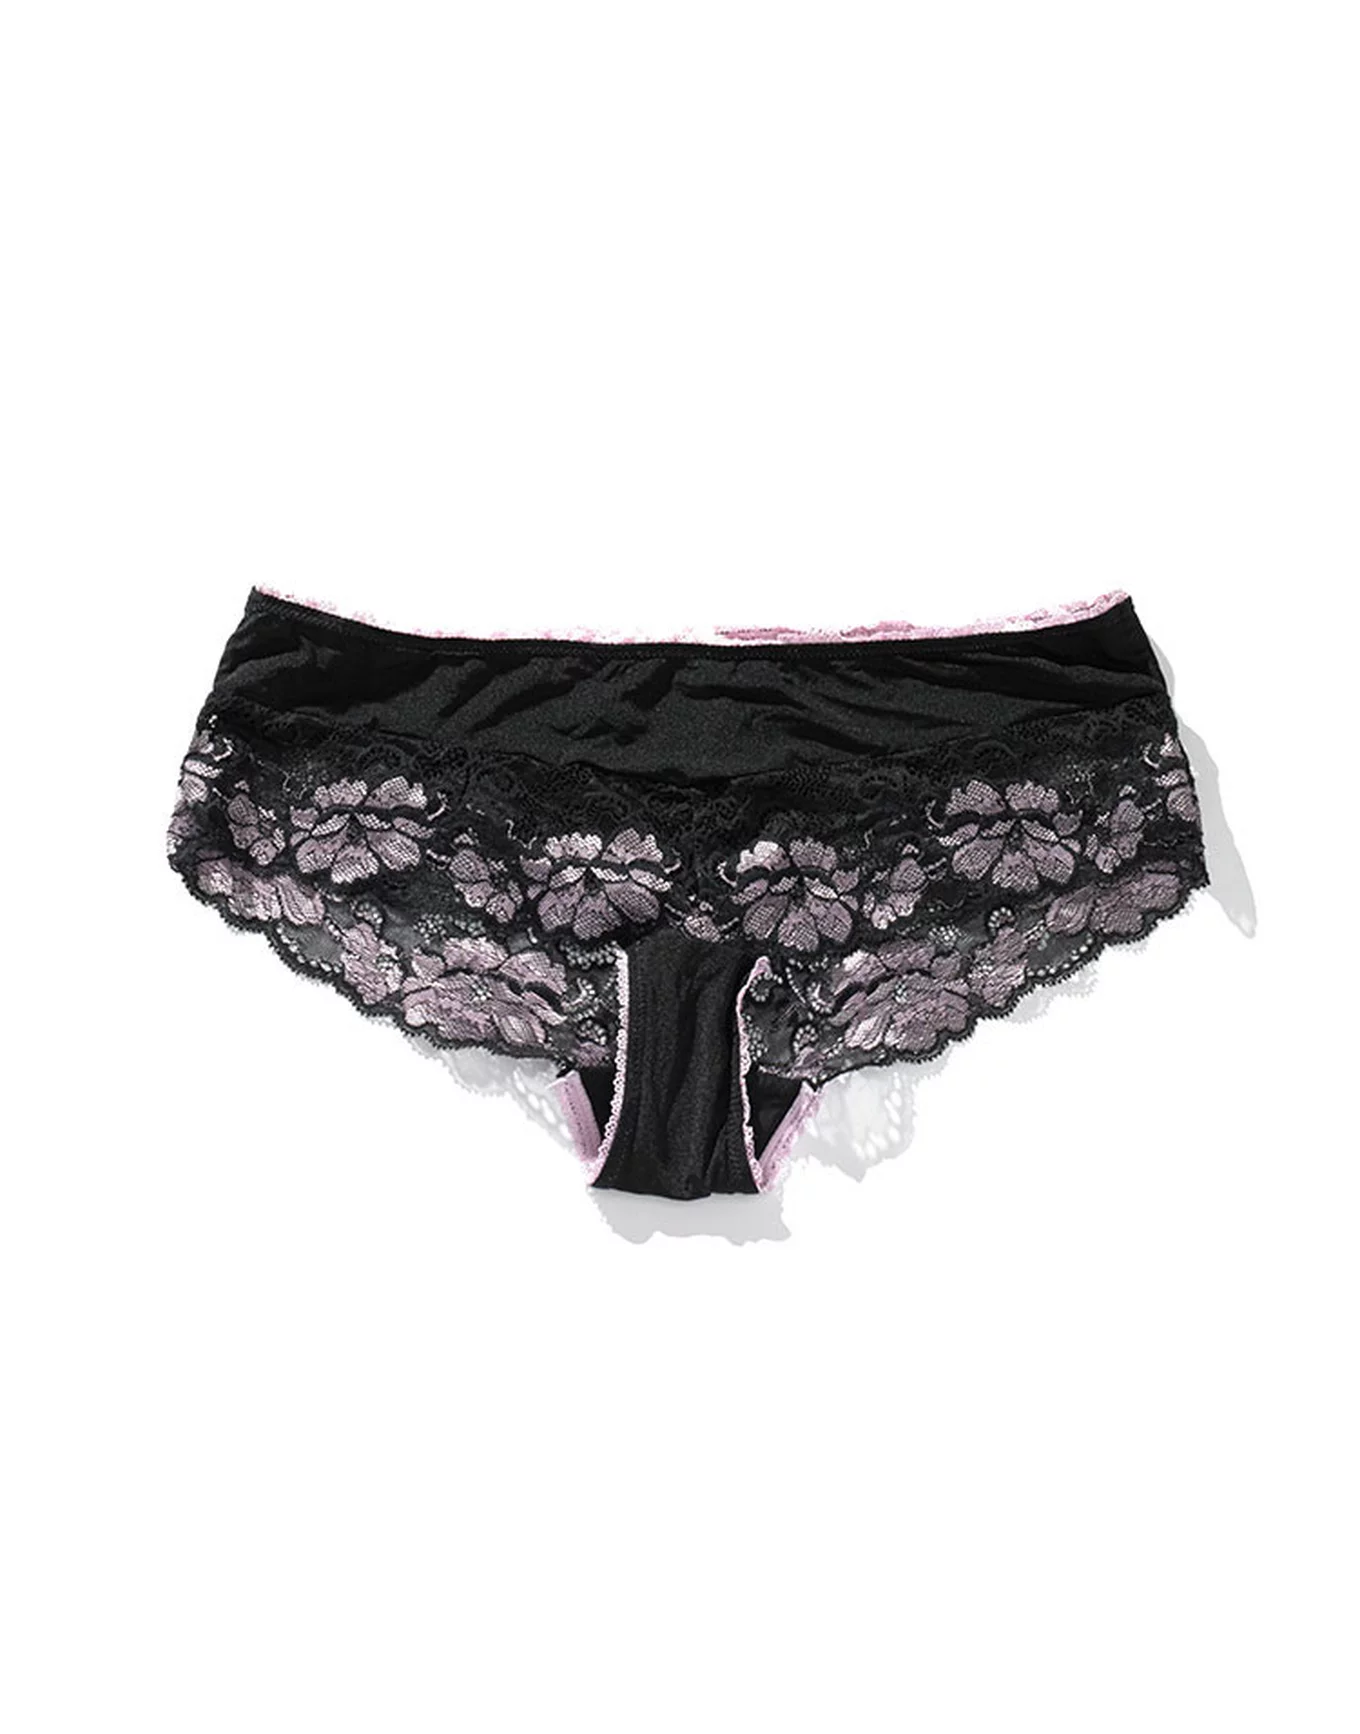 Adore Me Leto Invisible Pack Women's Plus-Size Hipster Panty